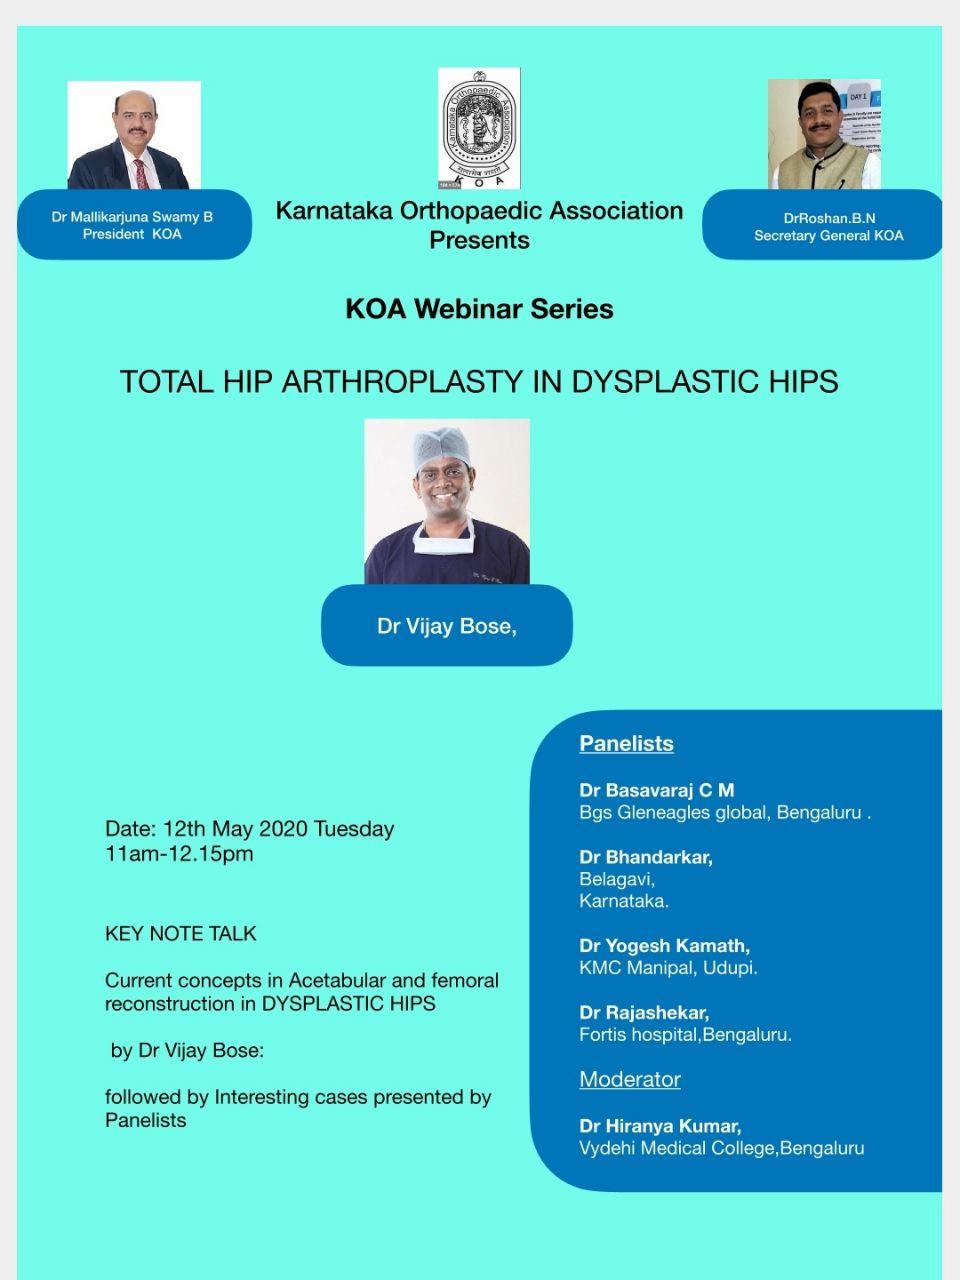 2020.05.12-Dr-Vijay-Bose-KEY-NOTE-TALK-Current-concepts-in-Acetabular-and-femoral-reconstruction-in-DYSPLASTIC-HIPS